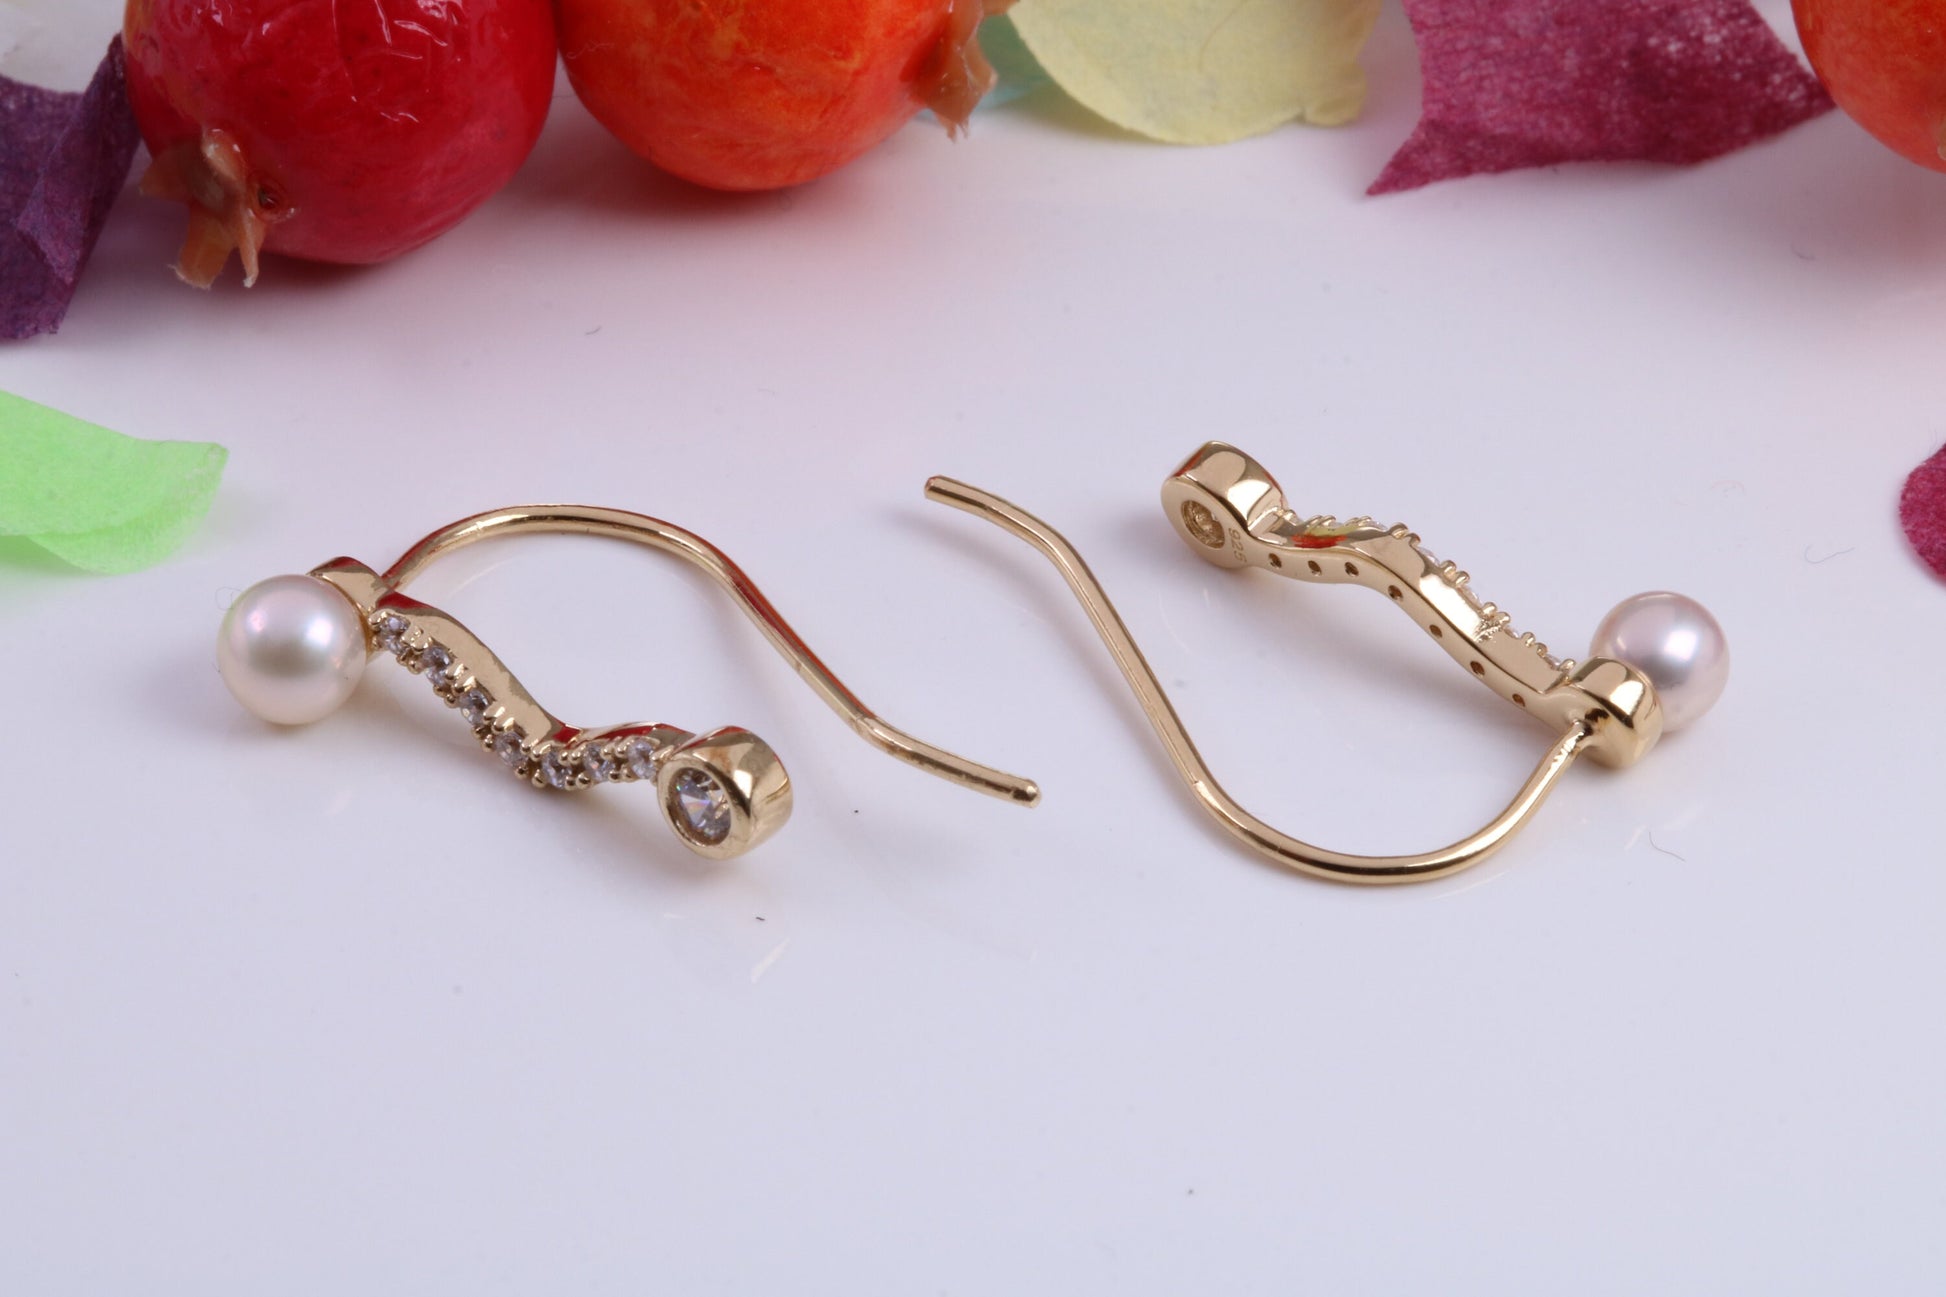 19 mm Long Pearl and Cubic Zirconia set Earrings, Made from Solid 925 Grade Sterling Silver and 18ct Yellow Gold Plated